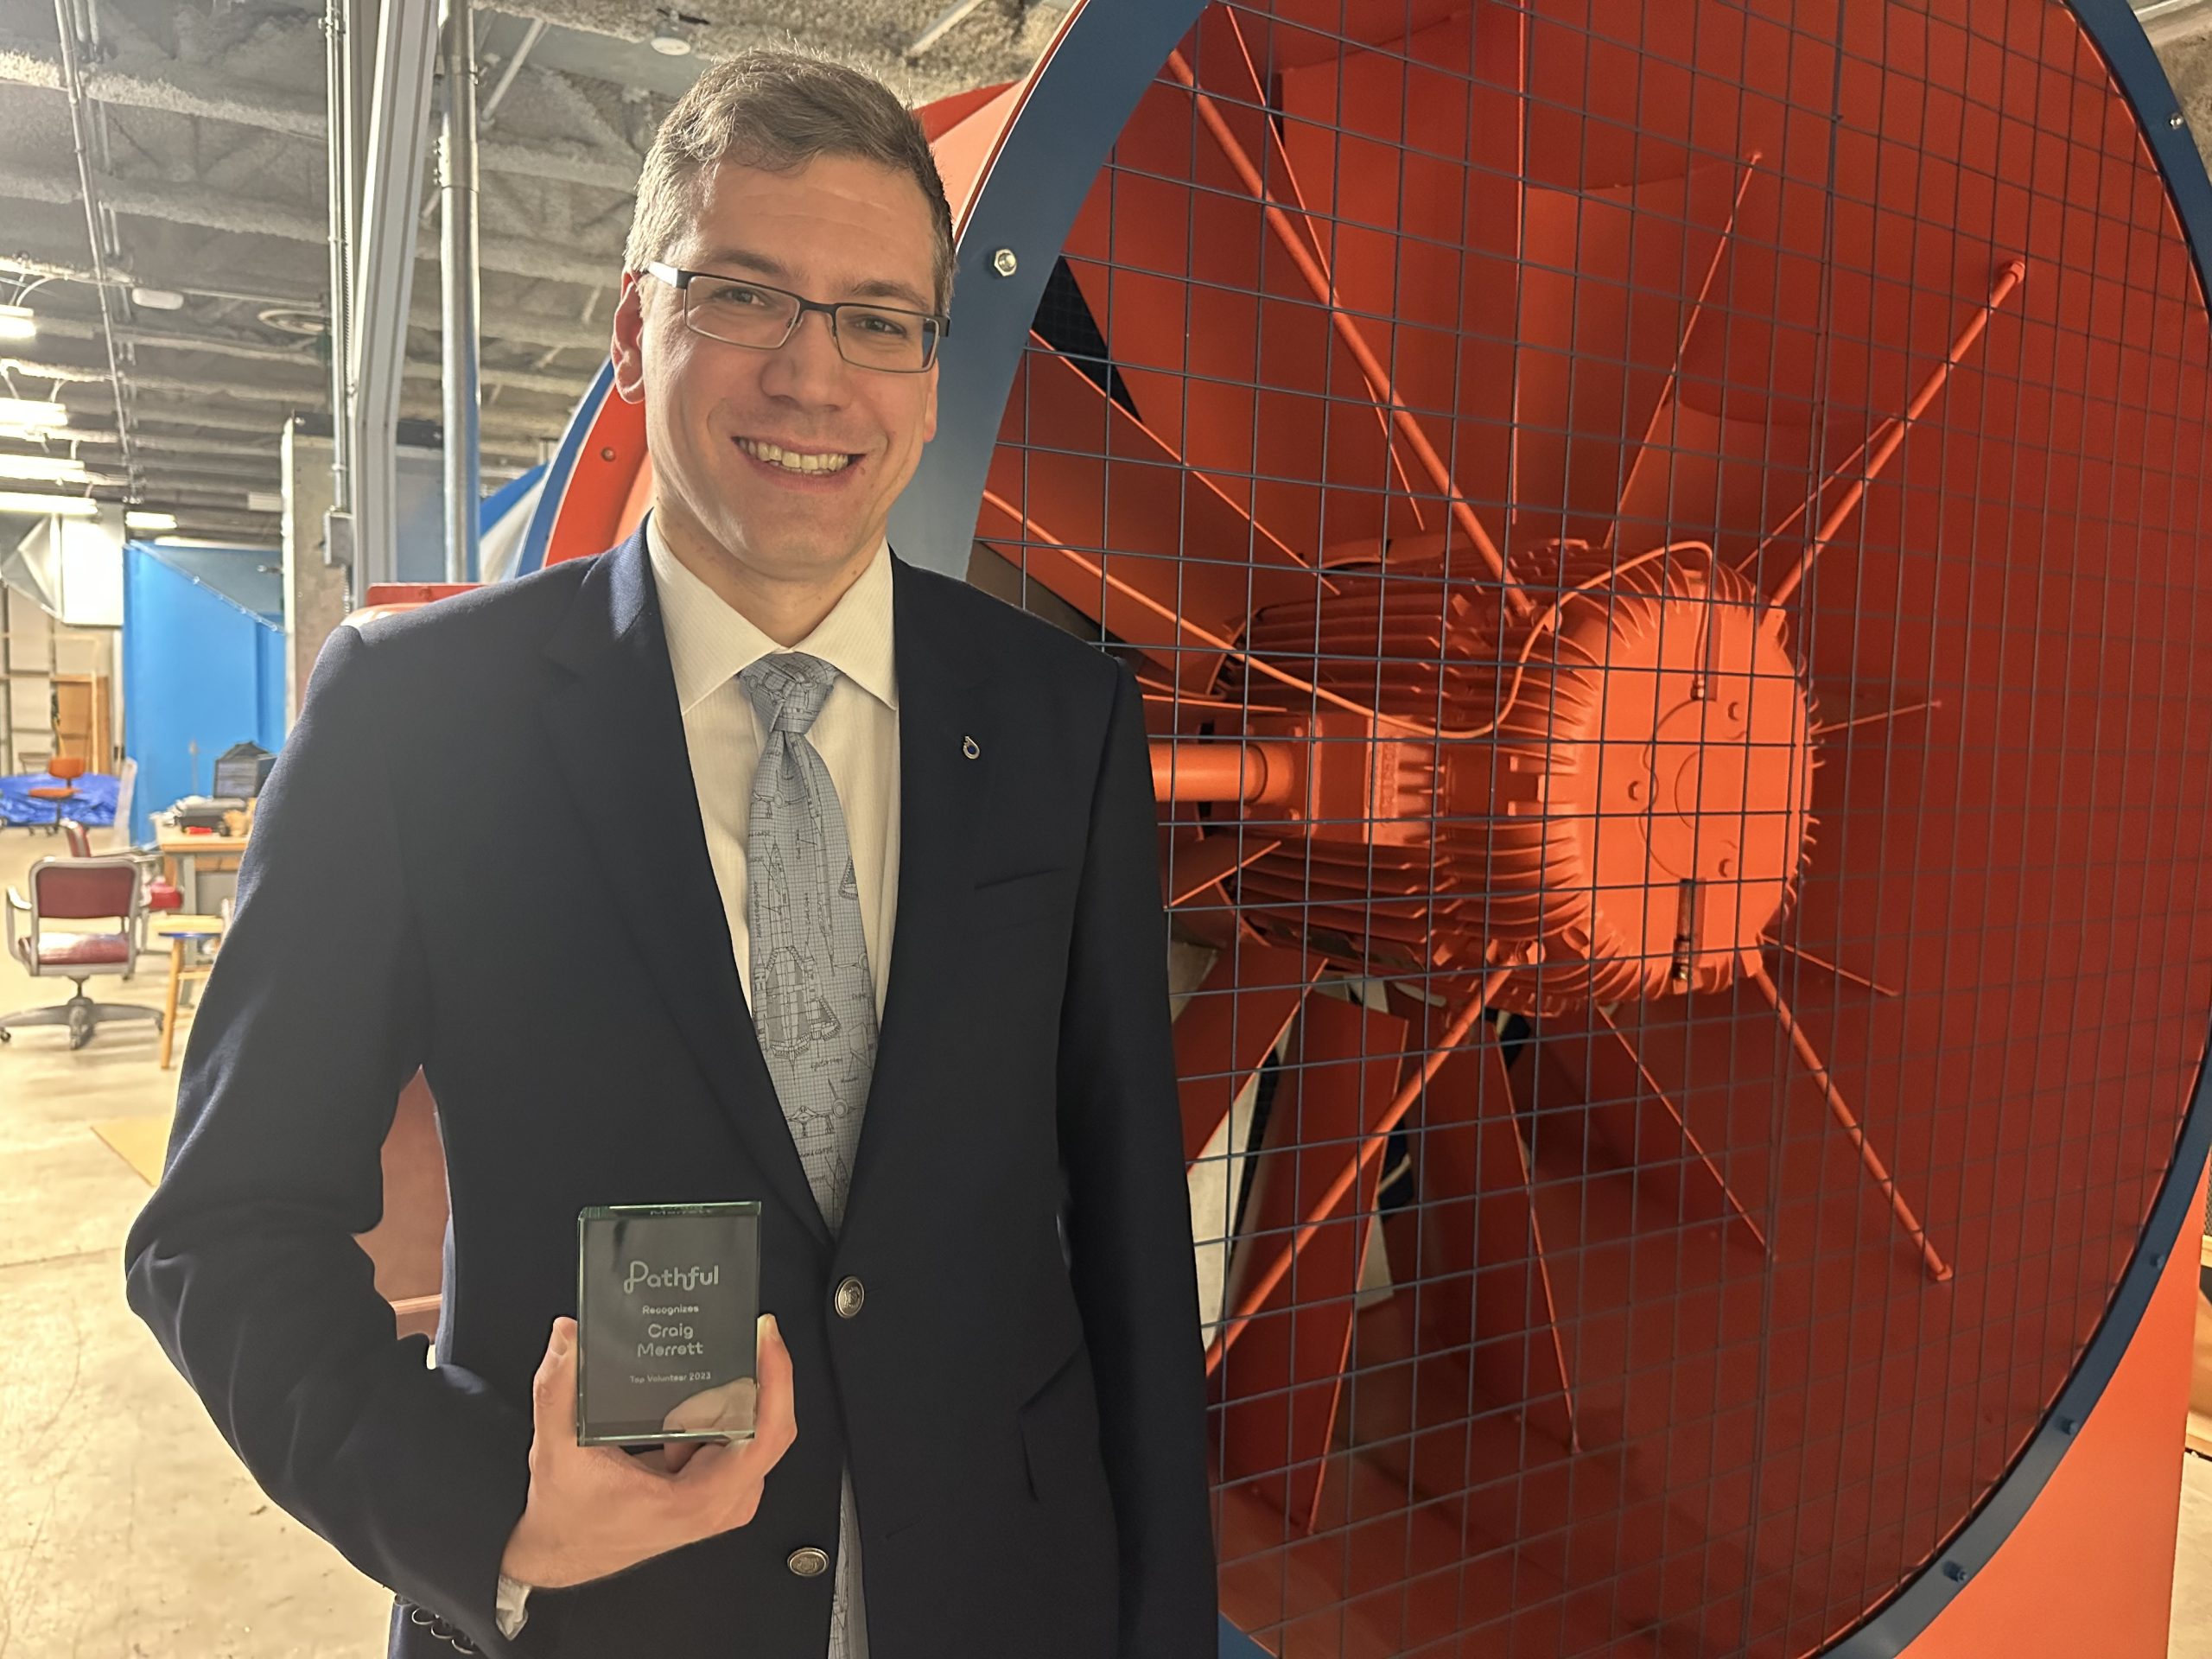 Portrait of Craig Merrett holding a crystal plaque next to a large fan connected to a wind tunnel.